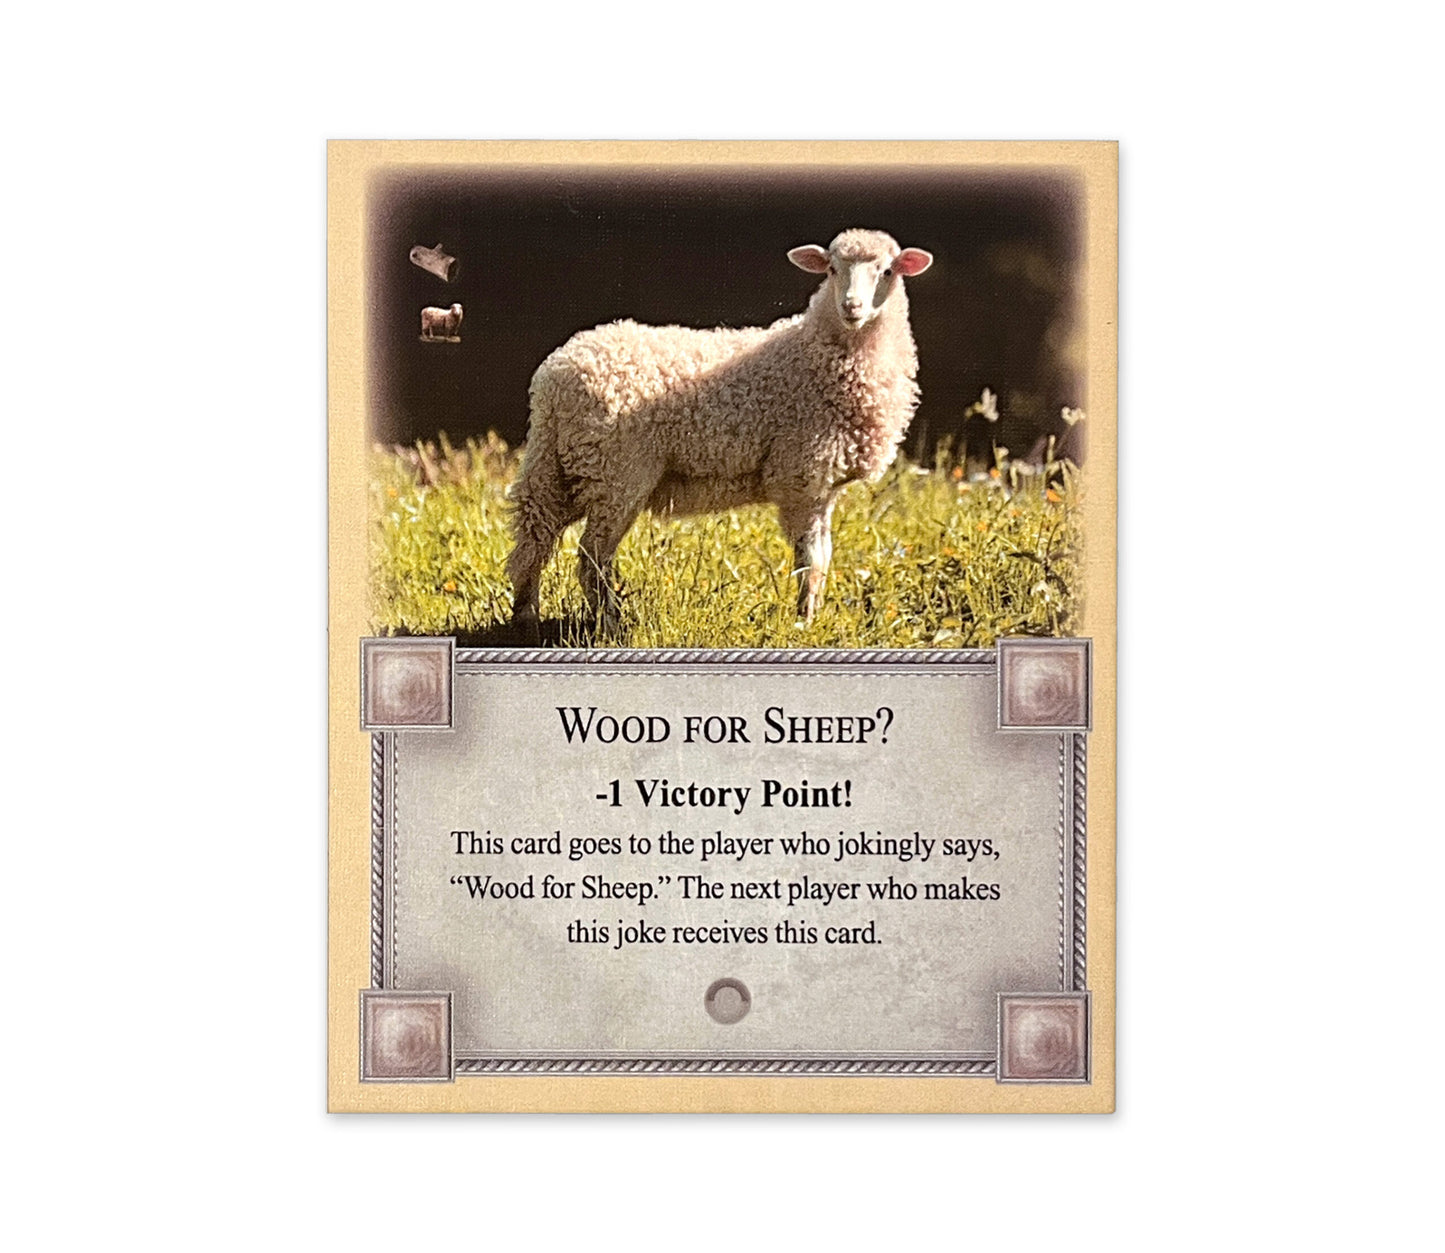 Wood for Sheep Penalty Card compatible with Catan's Settlers of Catan, Seafarers, and Catan Expansions